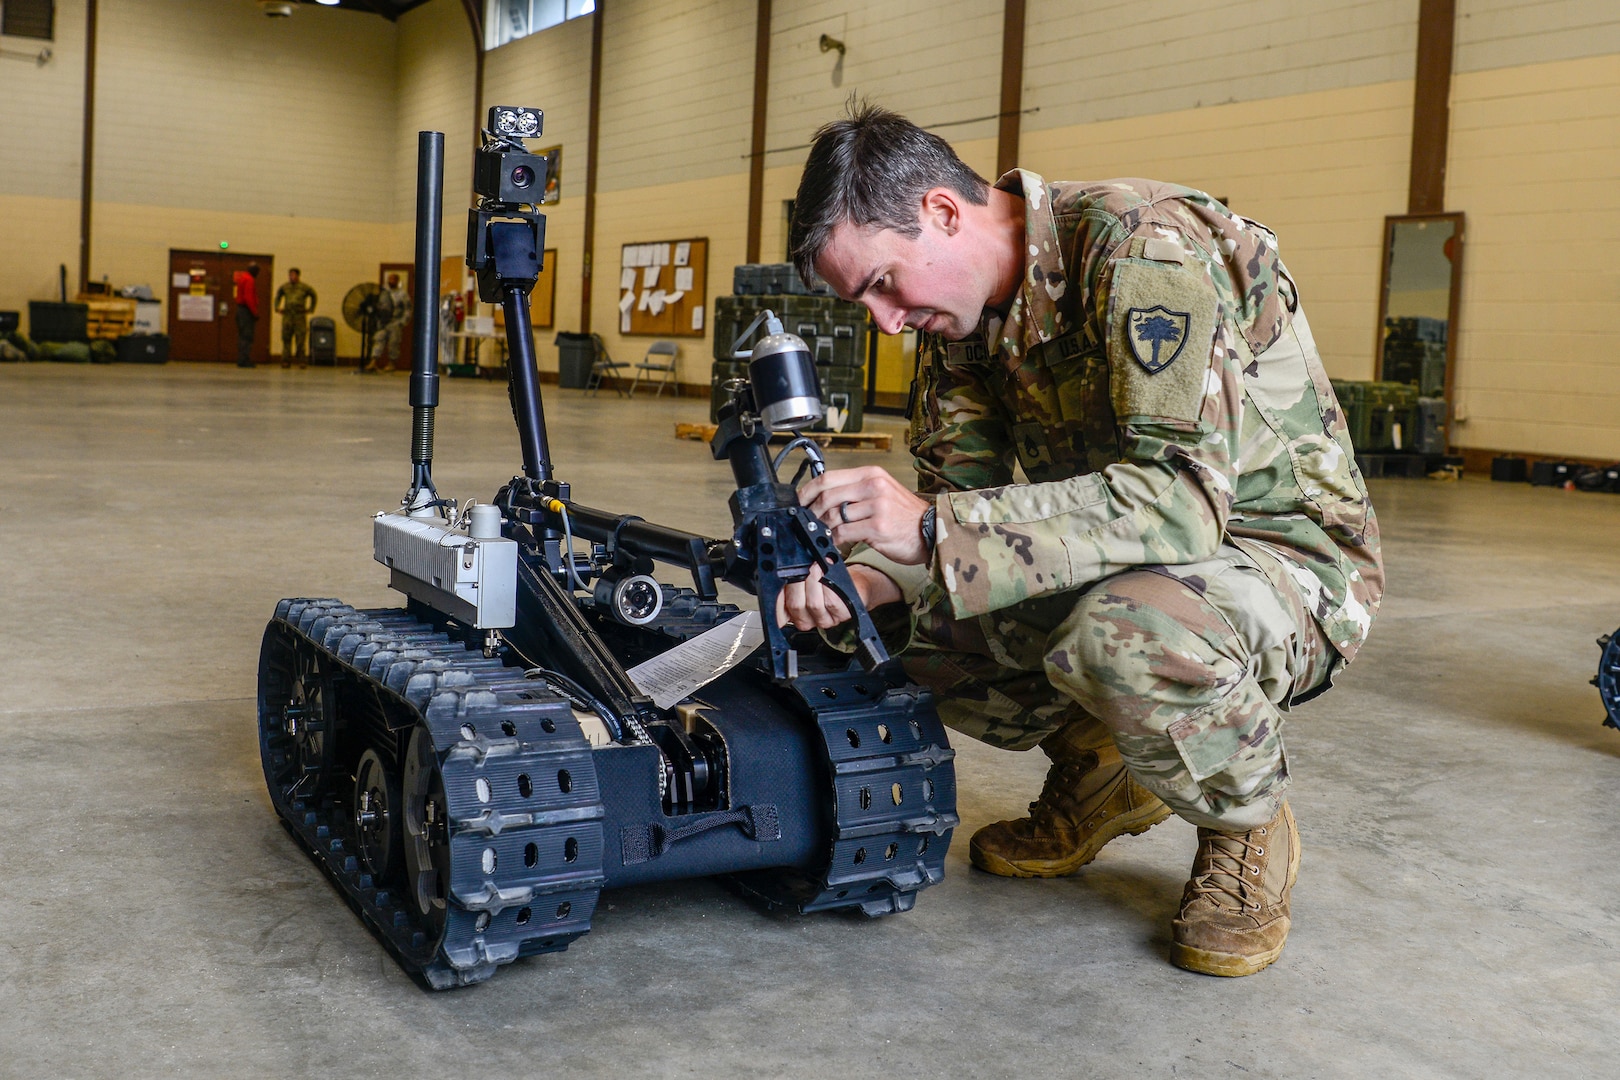 Army Staff Sgt. Kevin O’Conner, a combat engineer with the South Carolina Army National Guard's 122nd Engineer Clearance Company, examines parts of a Talon IV Reset robotic vehicle while conducting training at the unit's home station in Graniteville, S.C., in Oct. 2018.  In the coming years, Soldiers throughout the Army National Guard can expect to see a wider variety of robots with expanded capabilities to meet a number of missions sets. That may  include a golf cart-sized robot designed to carry a squad's equipment as well as advances in autonomous vehicles that follow a lead vehicle driven by Soldiers.